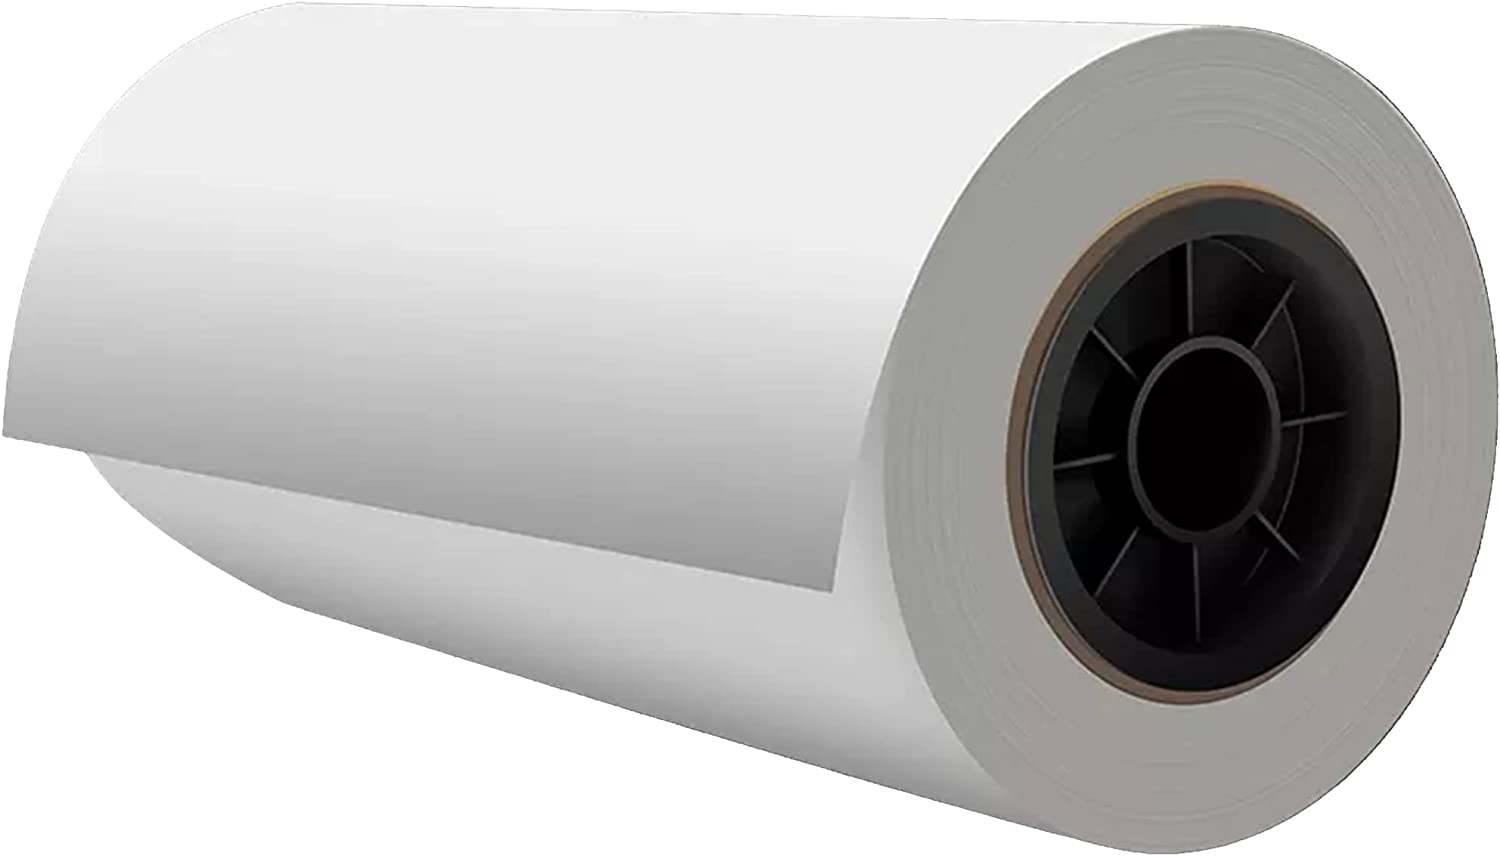 NGOODIEZ DTF Film Roll - Premium Transfer Film for Direct to Film Printing  - Heat Transfer Paper for T-Shirts, Dark and Light Fabric